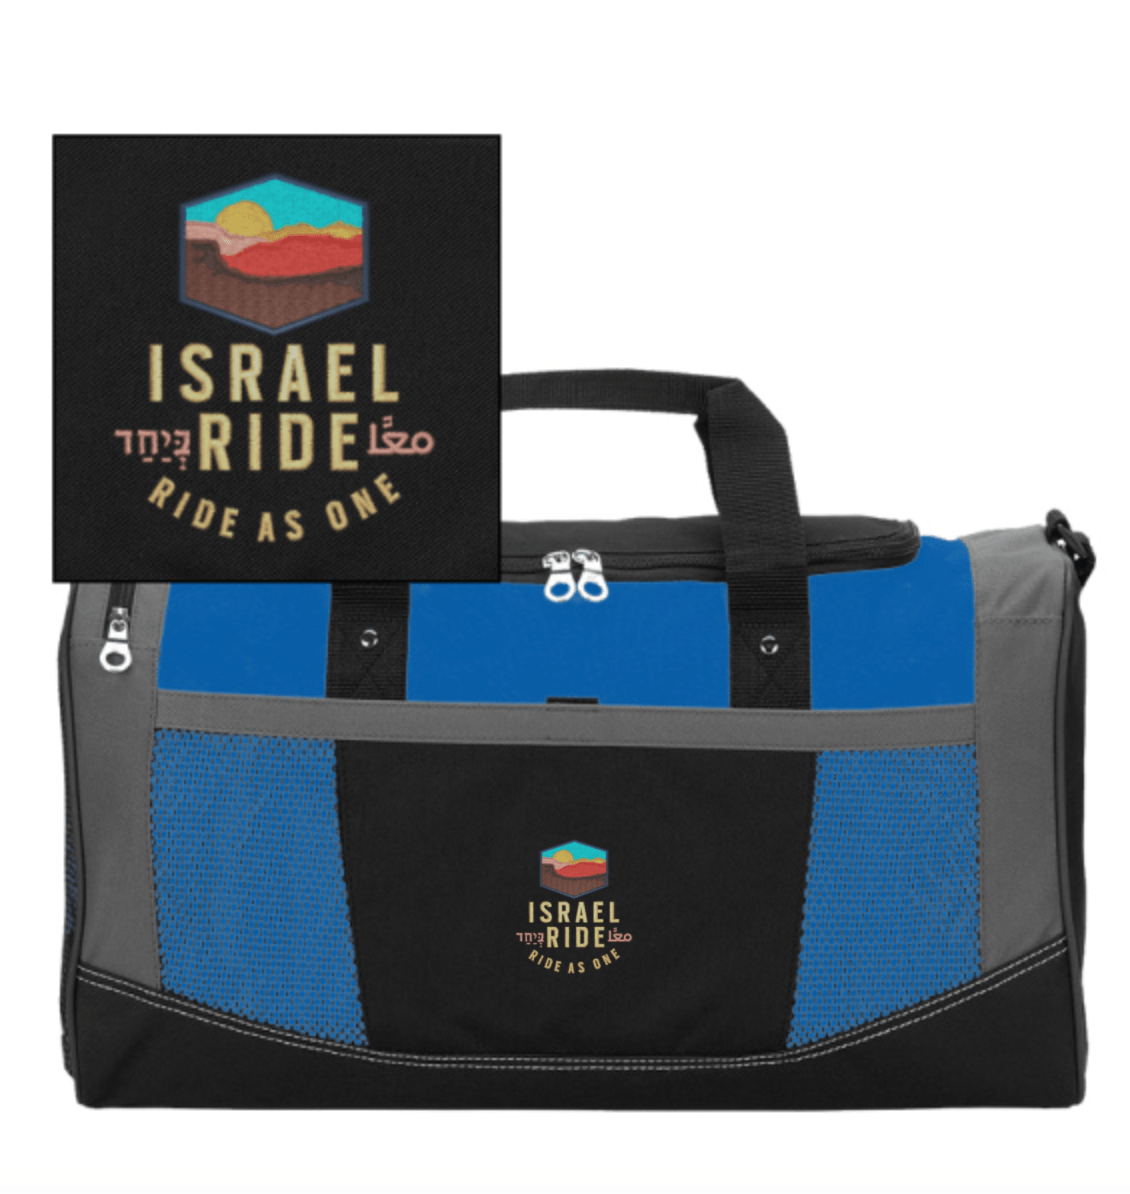 Blue Israel Ride duffel bag with Israel Ride logo featured in the center of the bag